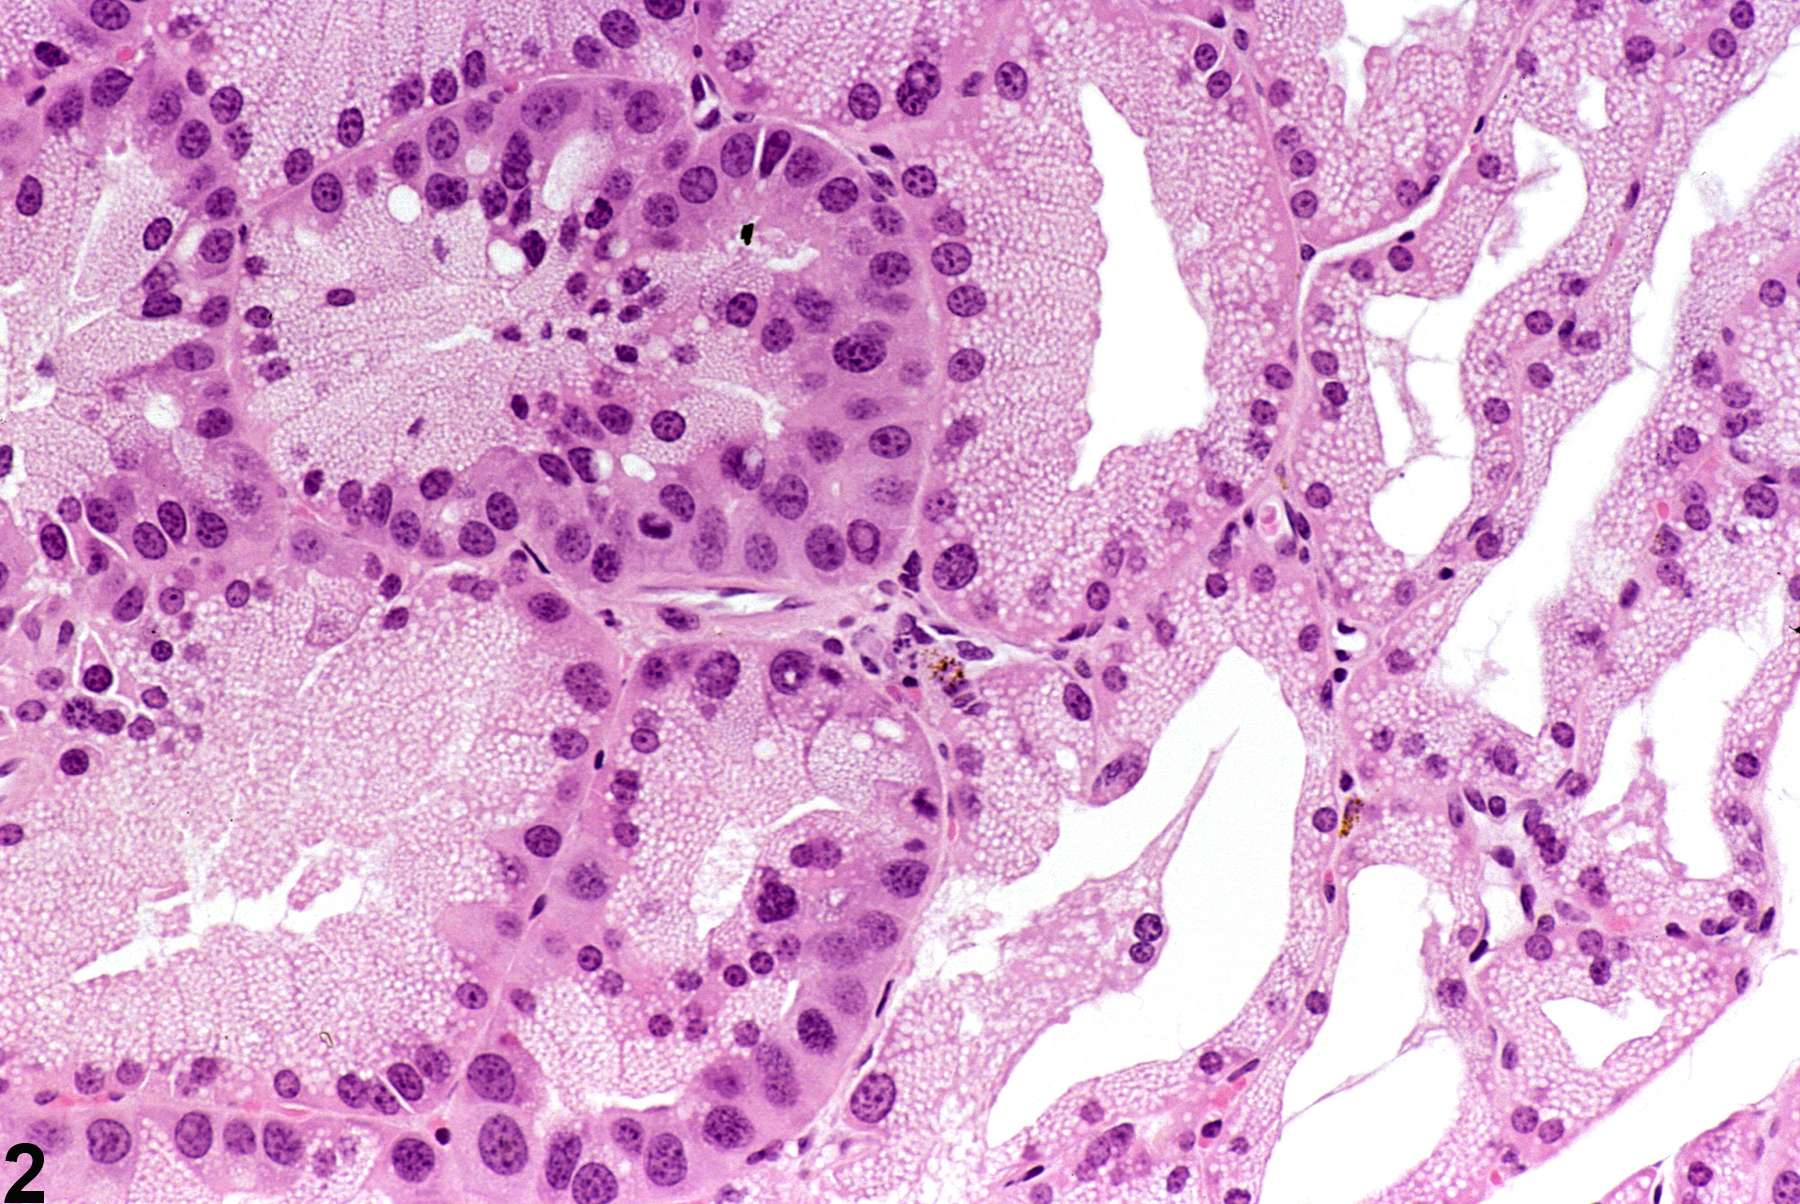 Image of hyperplasia in the Harderian gland from a male B6C3F1 mouse in a chronic study